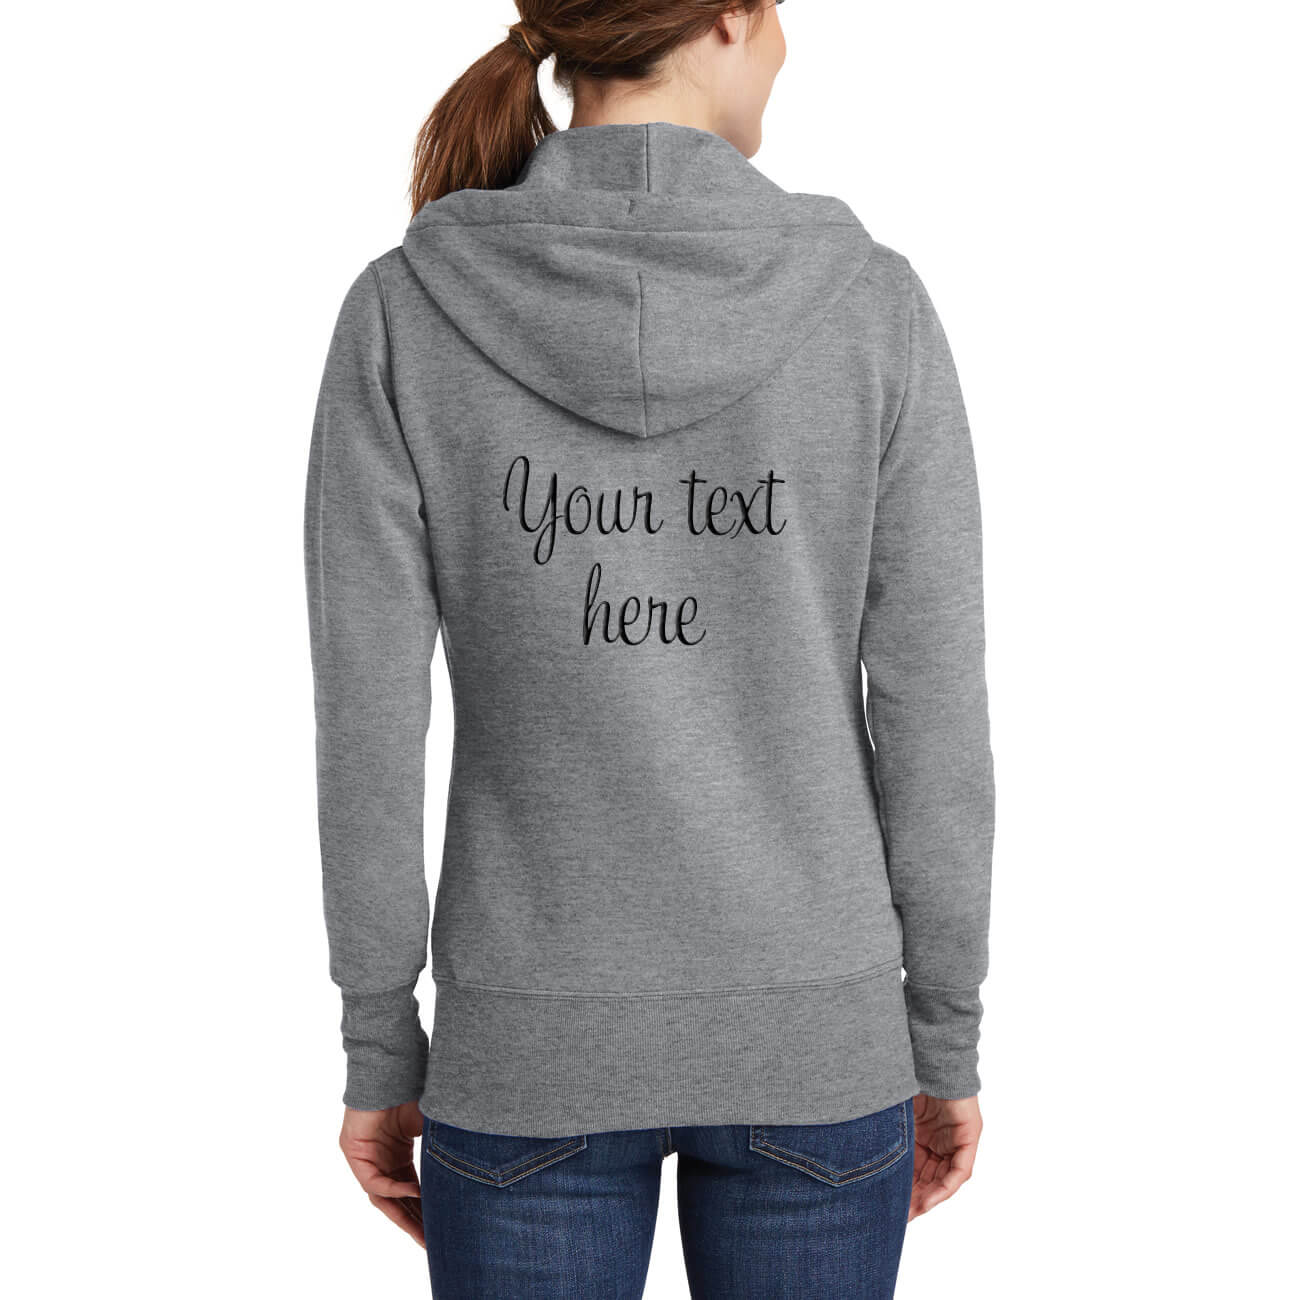 Embroidered Hoodie Designs | Custom Embroidery